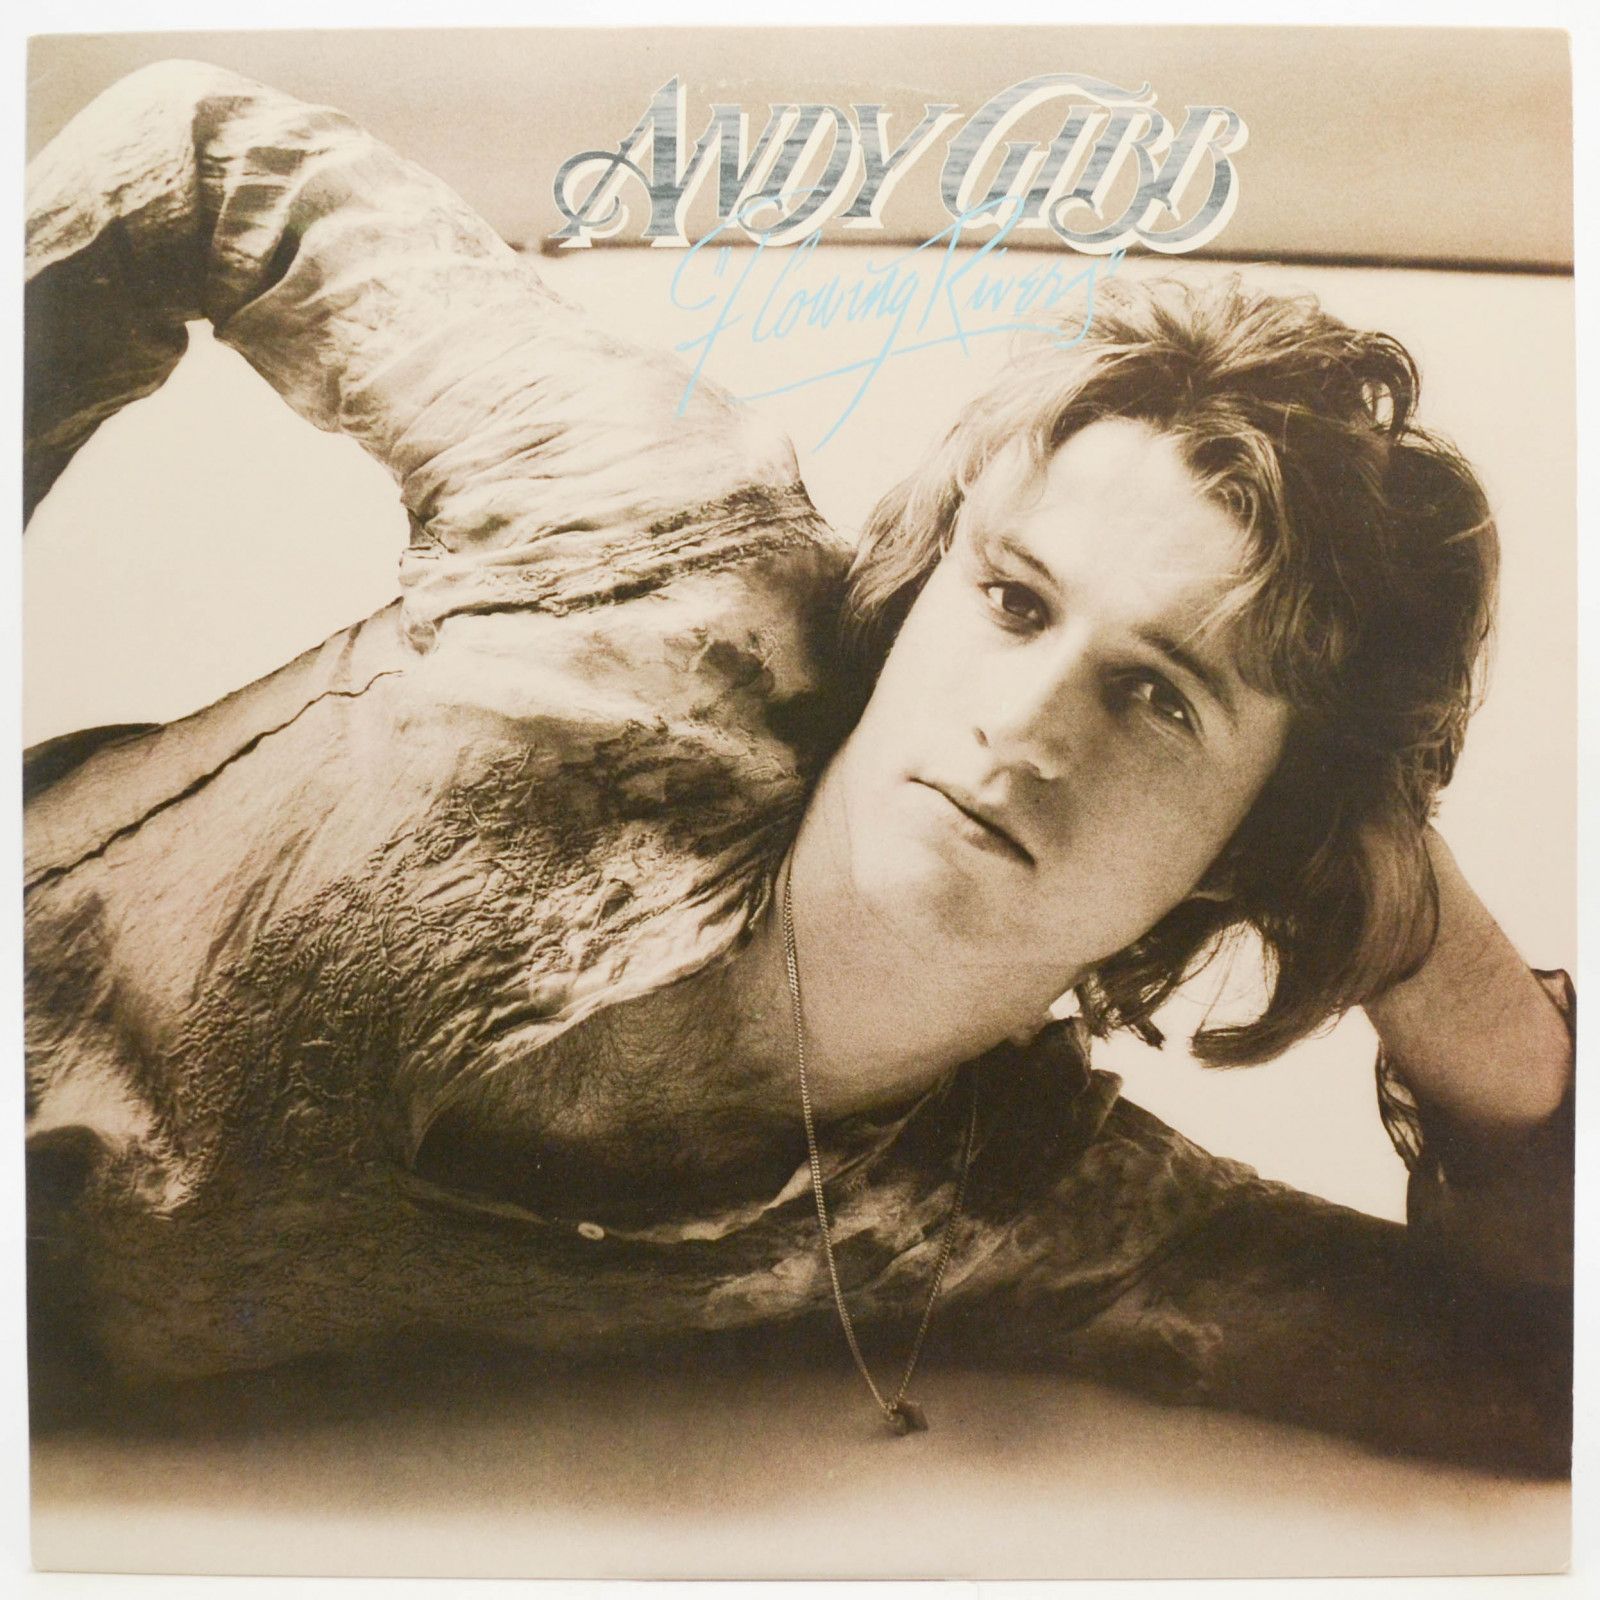 Andy Gibb — Flowing Rivers (USA), 1977